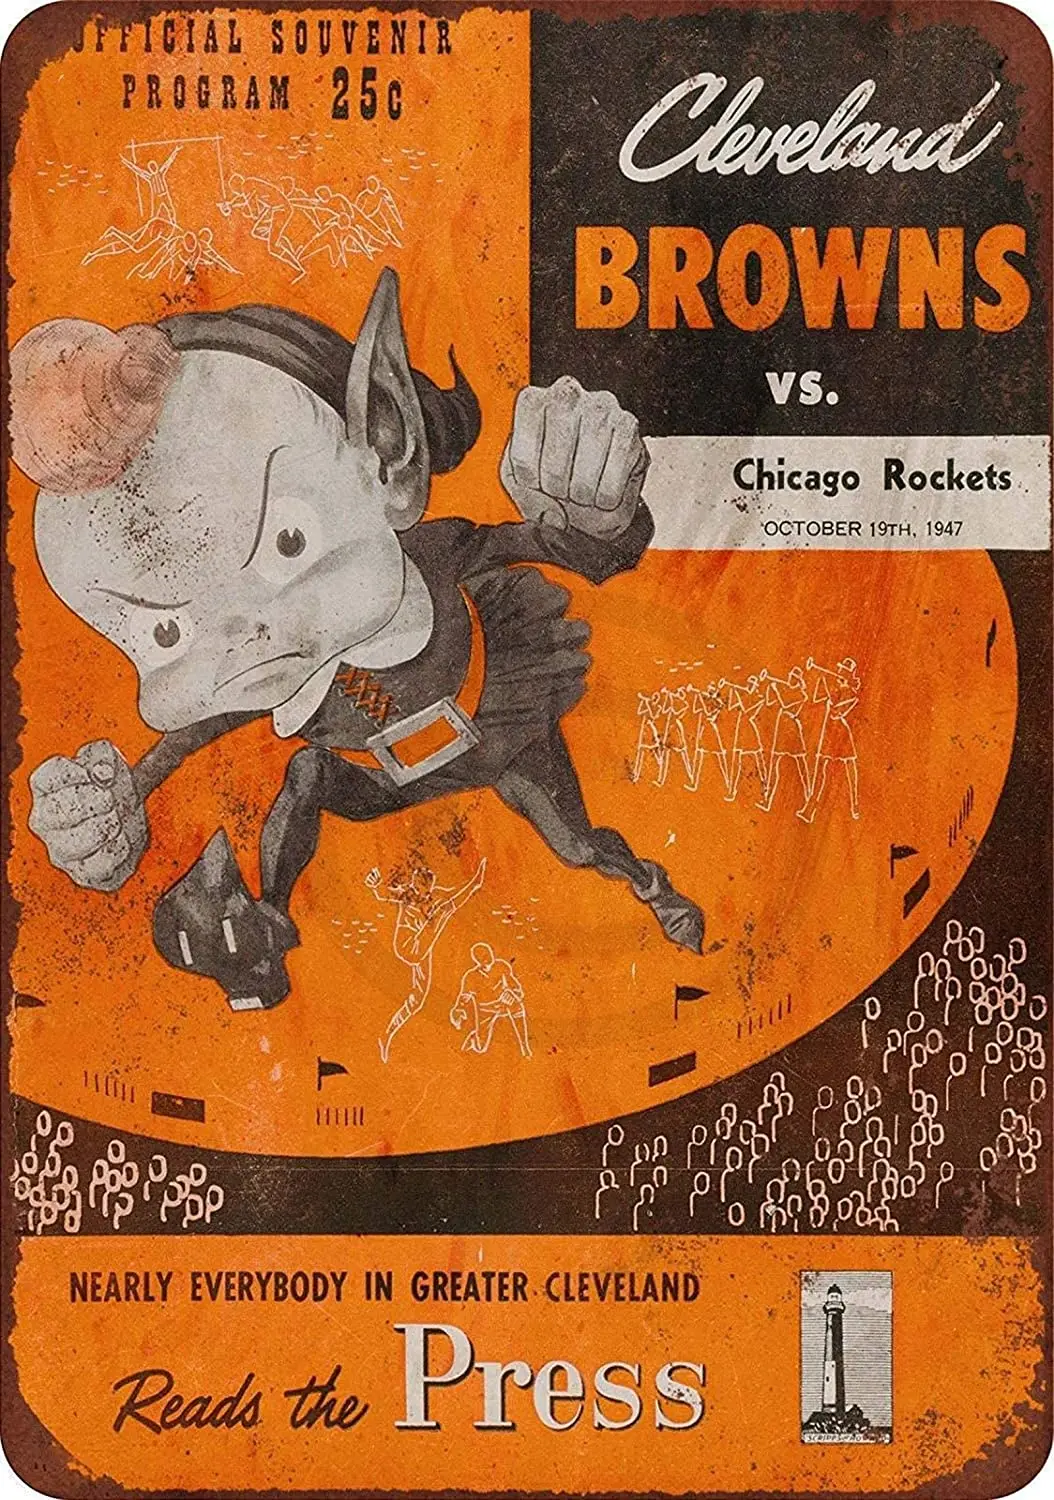 

1947 Cleveland Browns Vs. Chicago Rockets Retro Metal Tin Sign Plaque Poster Wall Decor Art Shabby Chic Gift Suitable 12x8 Inch